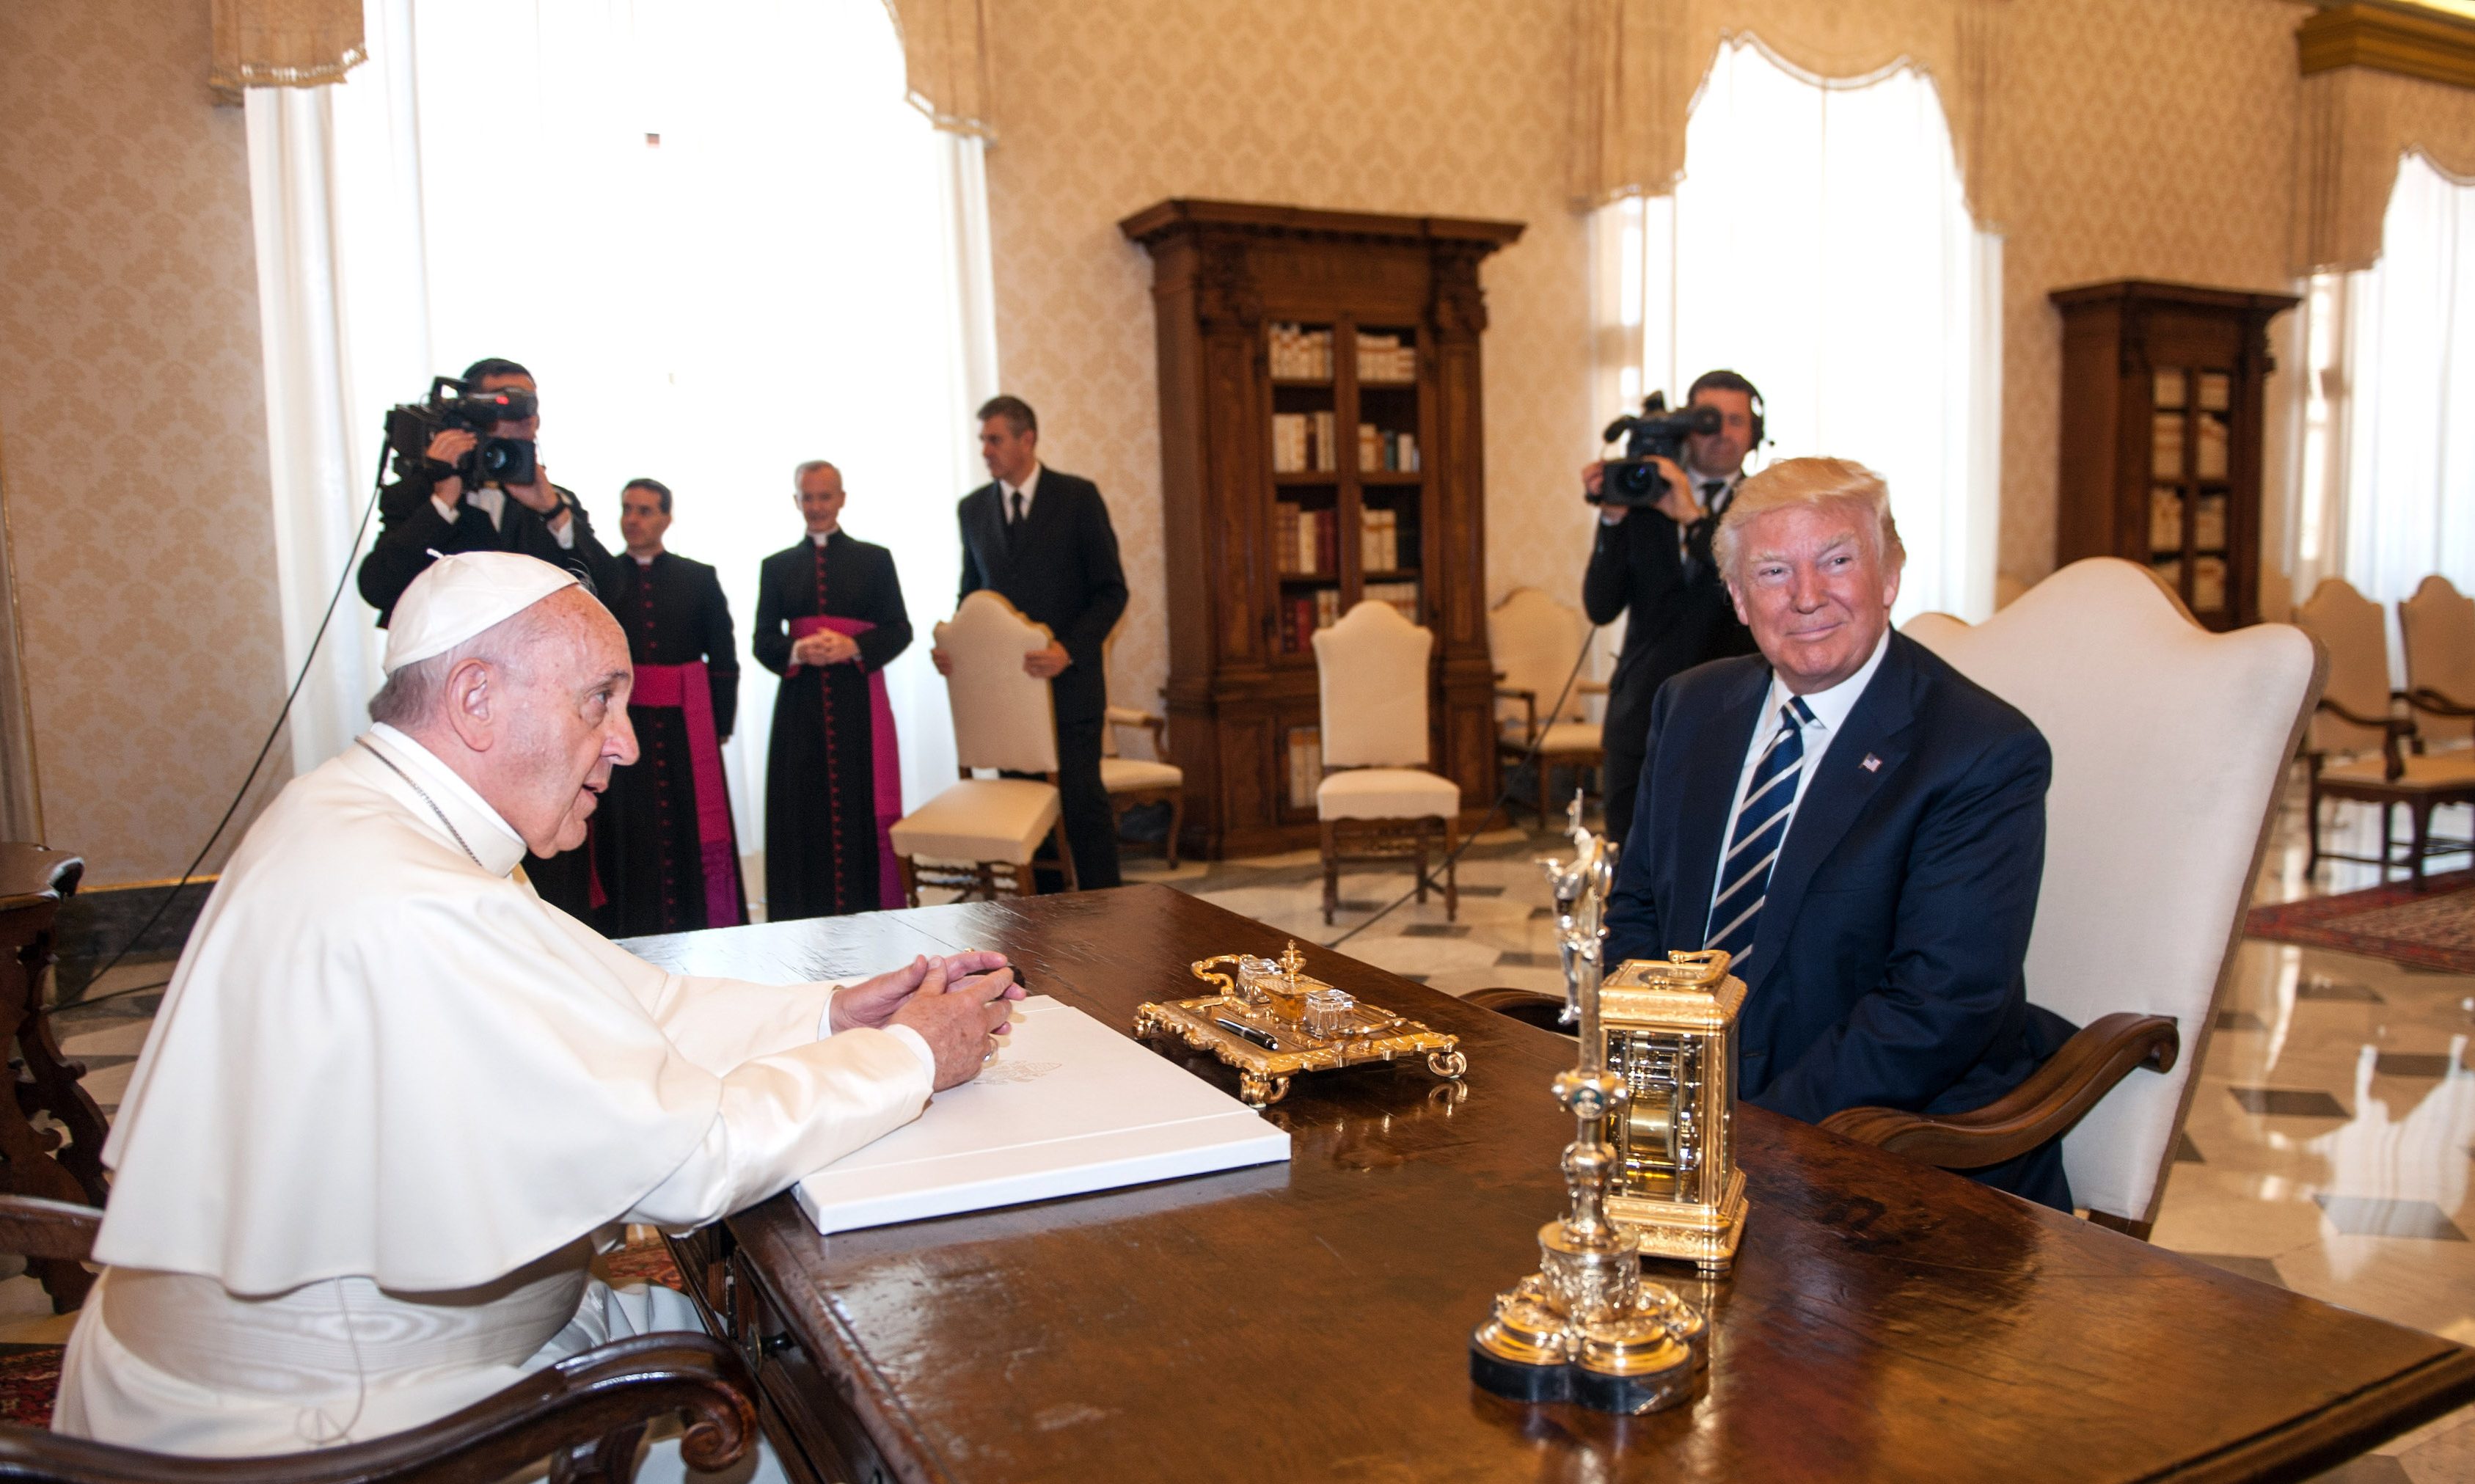 Pope Francis meets U.S. President Donald Trump on May 24, 2017 in Vatican City, Vatican. (Getty Images)